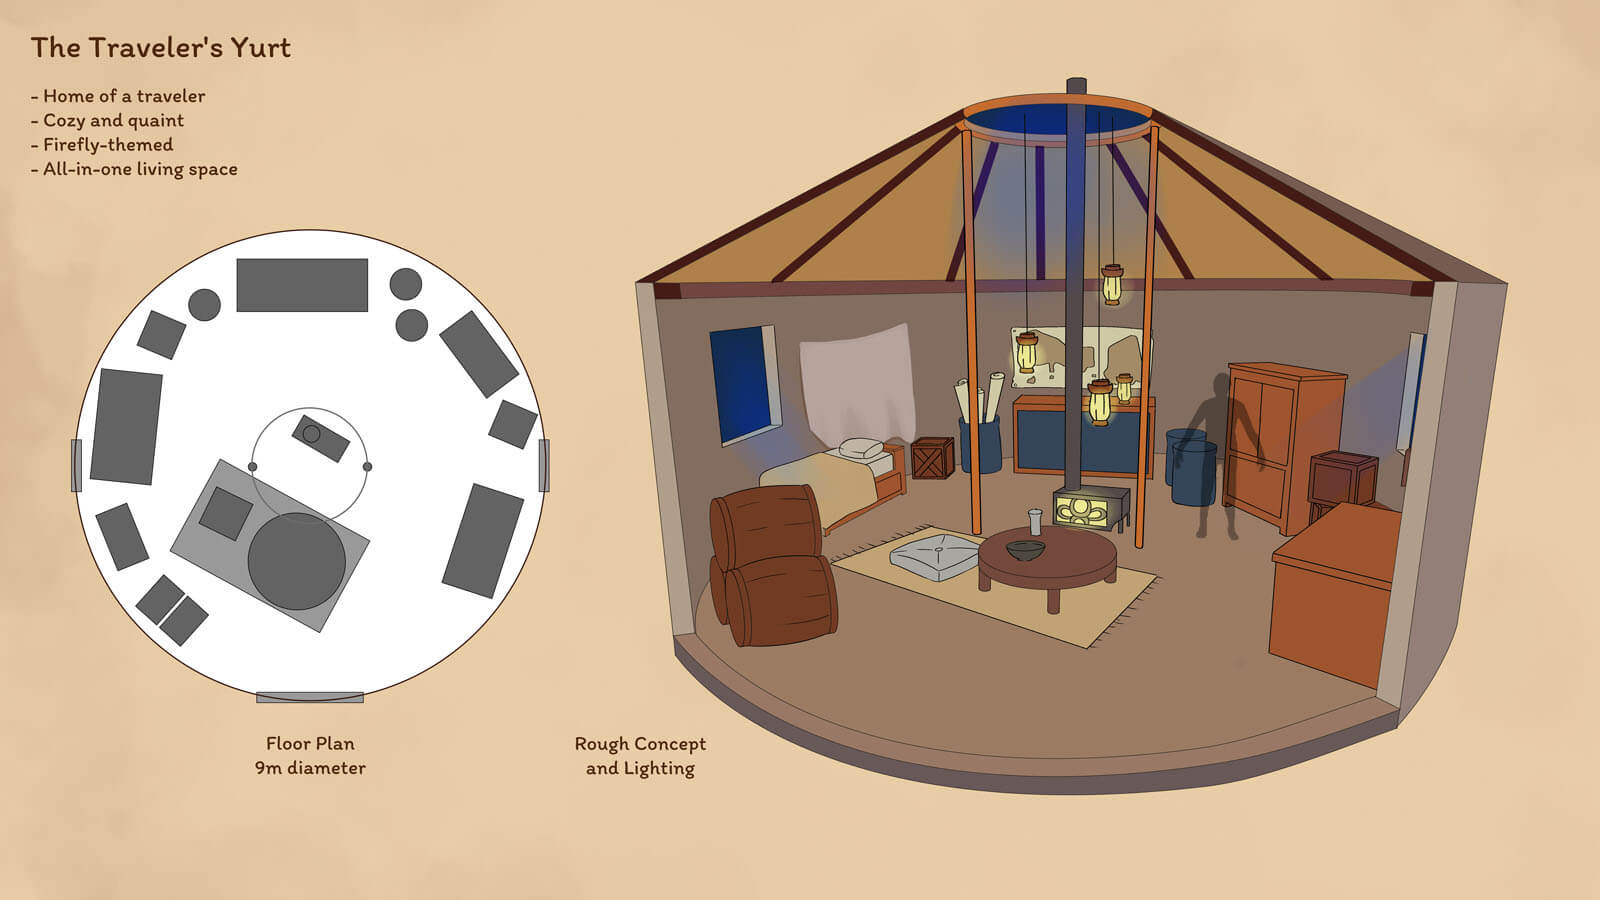 A preliminary cutaway view of what the yurt's interior looks like